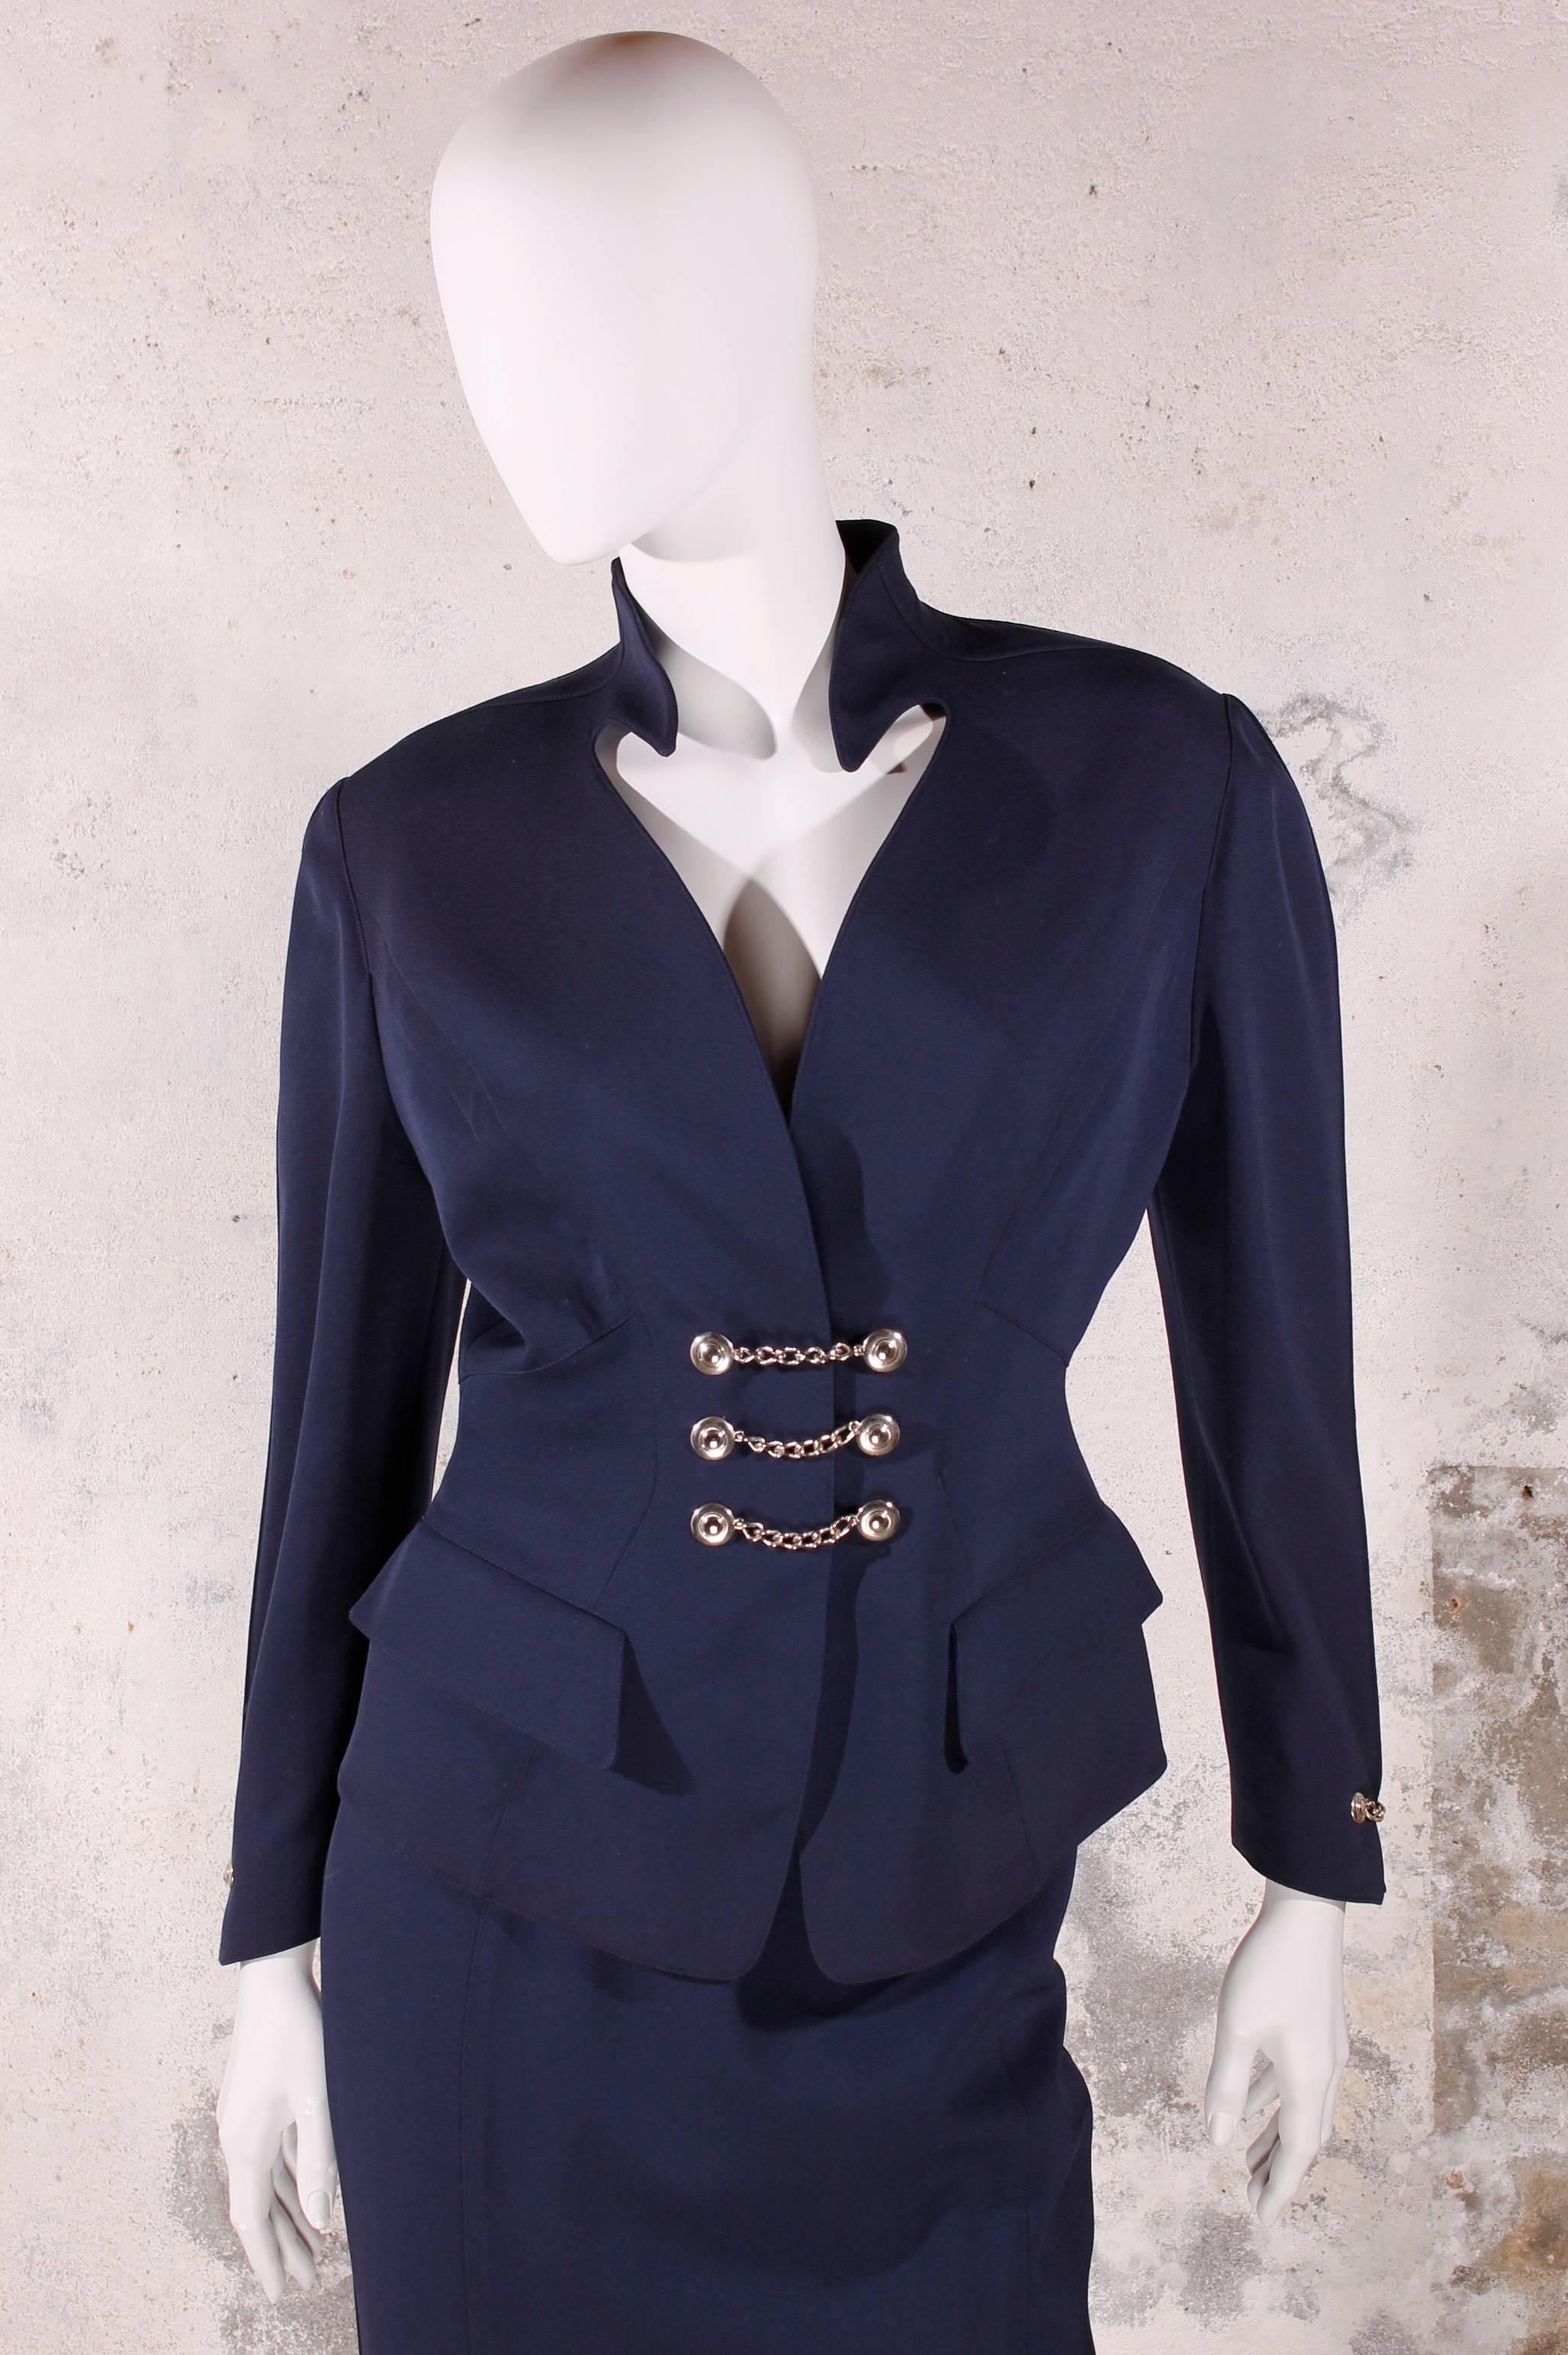 Straight from the 80's: a stunning two piece suit by Thierry Mugler. Dark blue,100% wool and in excellent condition.

The jacket is tailored, has no lapel, but does have a very typical Mugler collar.

Two flap pockets above the hips and a very